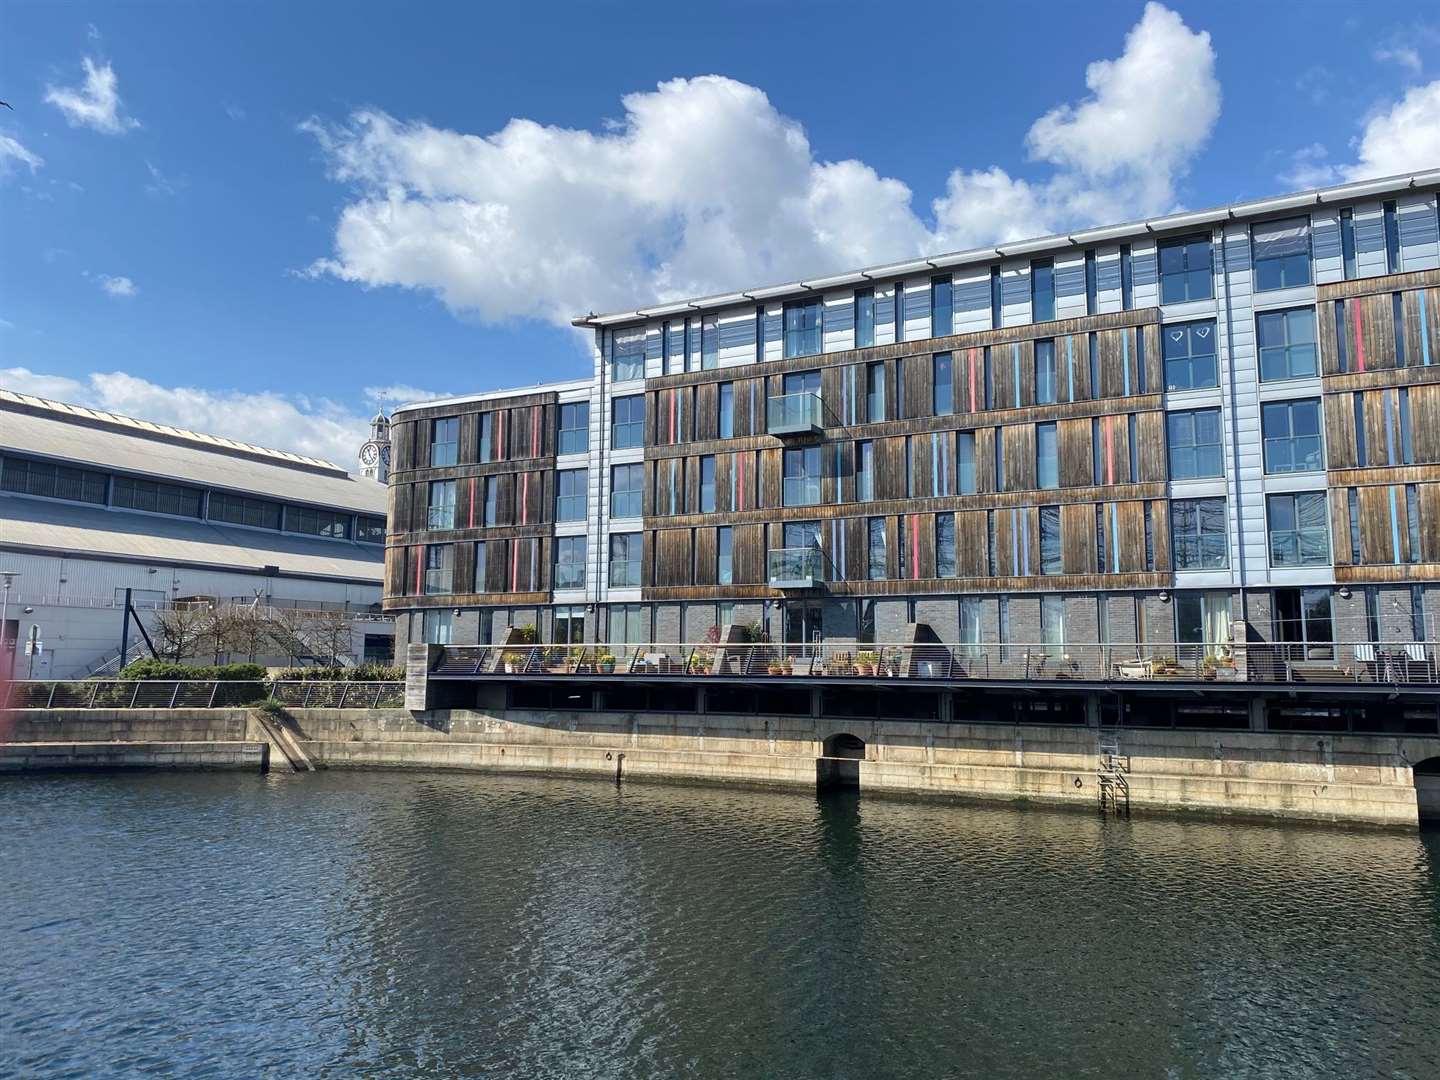 There are about 140 flats at The Wharf which could cost upwards of £3 million to bring it up to the safety standards. In the meantime owners cannot remortgage or sell their homes as lenders will not give buyers a mortgage